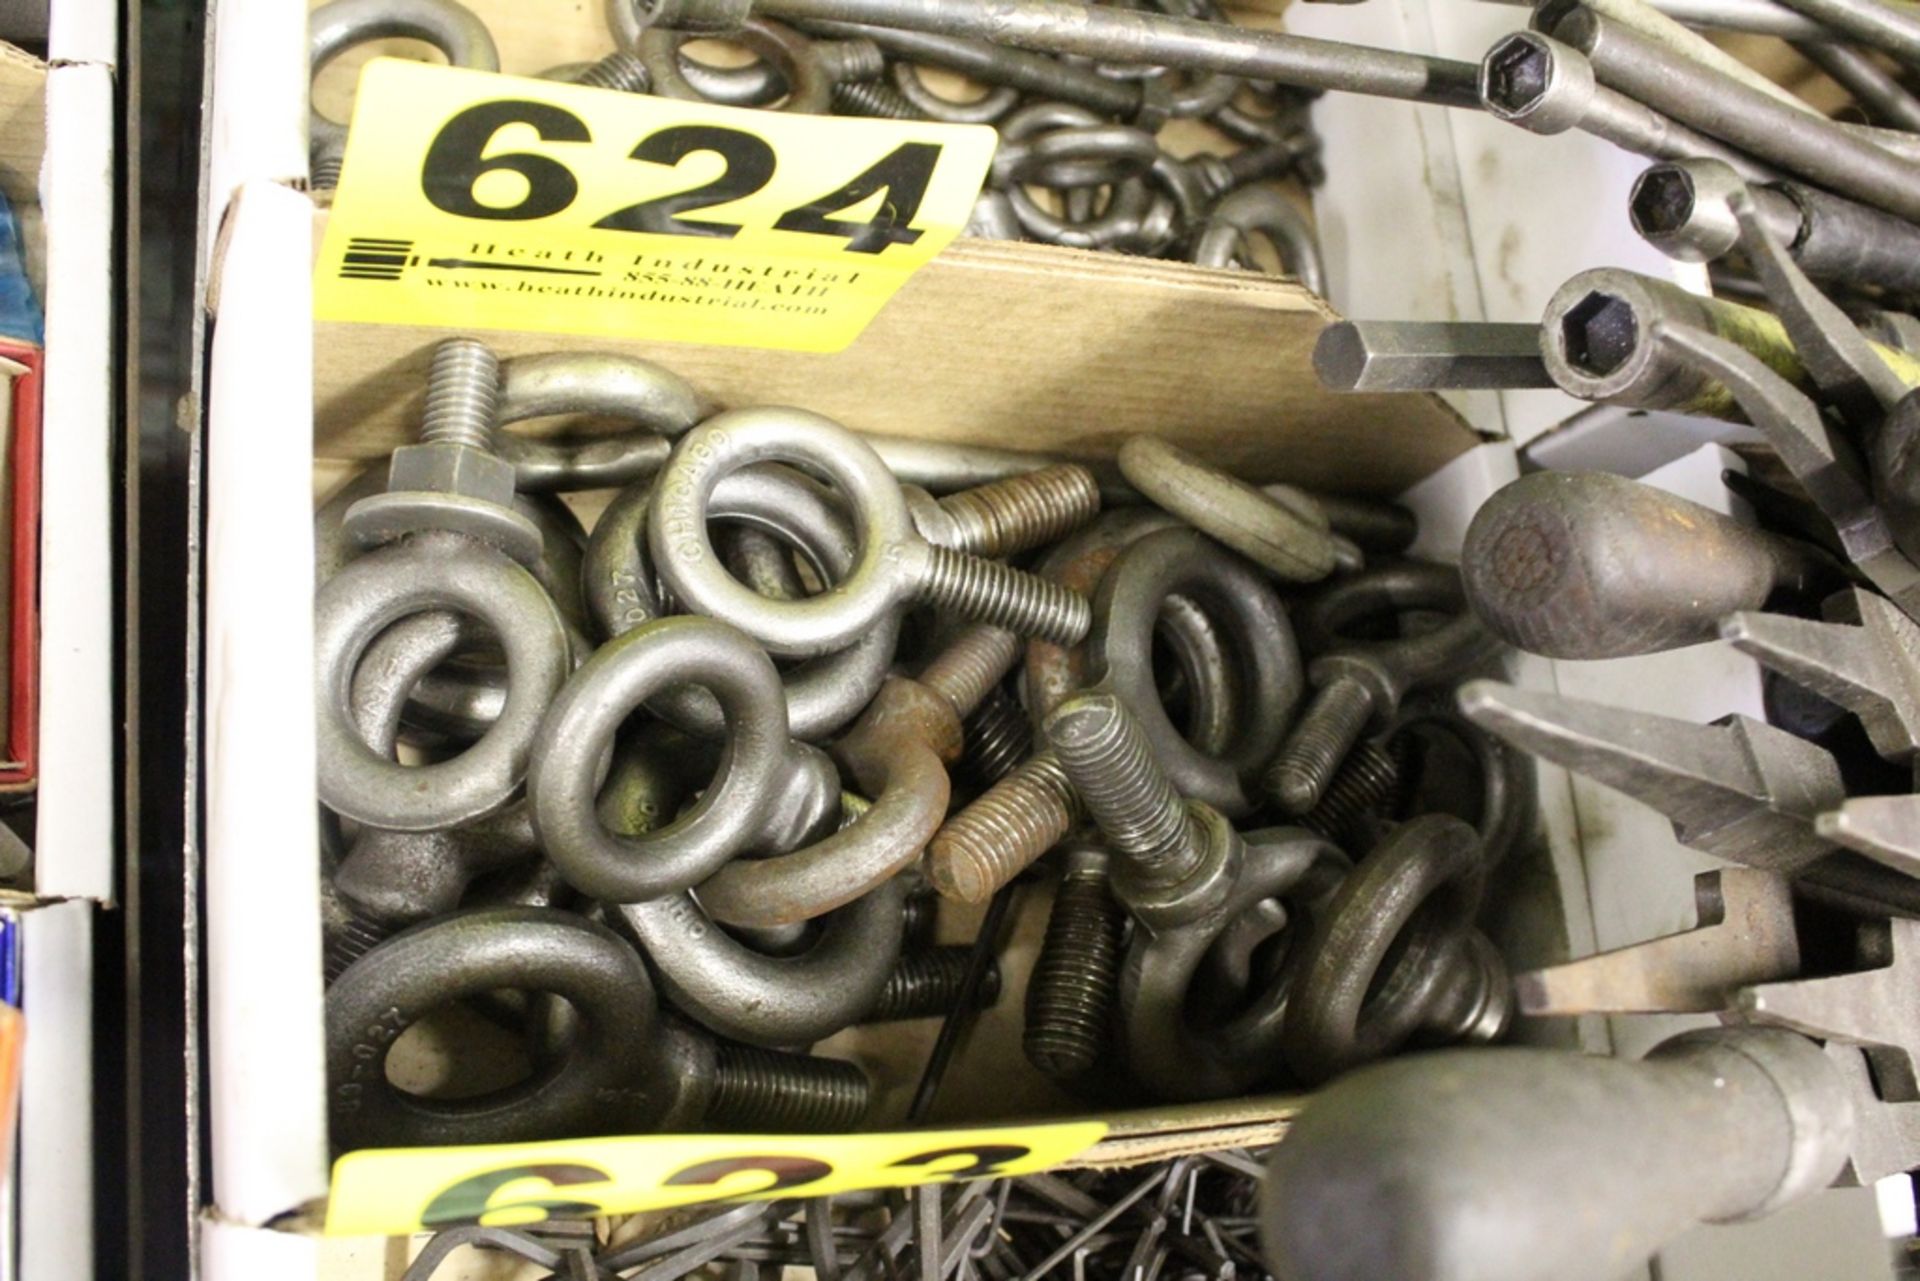 LARGE ASSORTMENT OF EYE BOLTS IN BOX